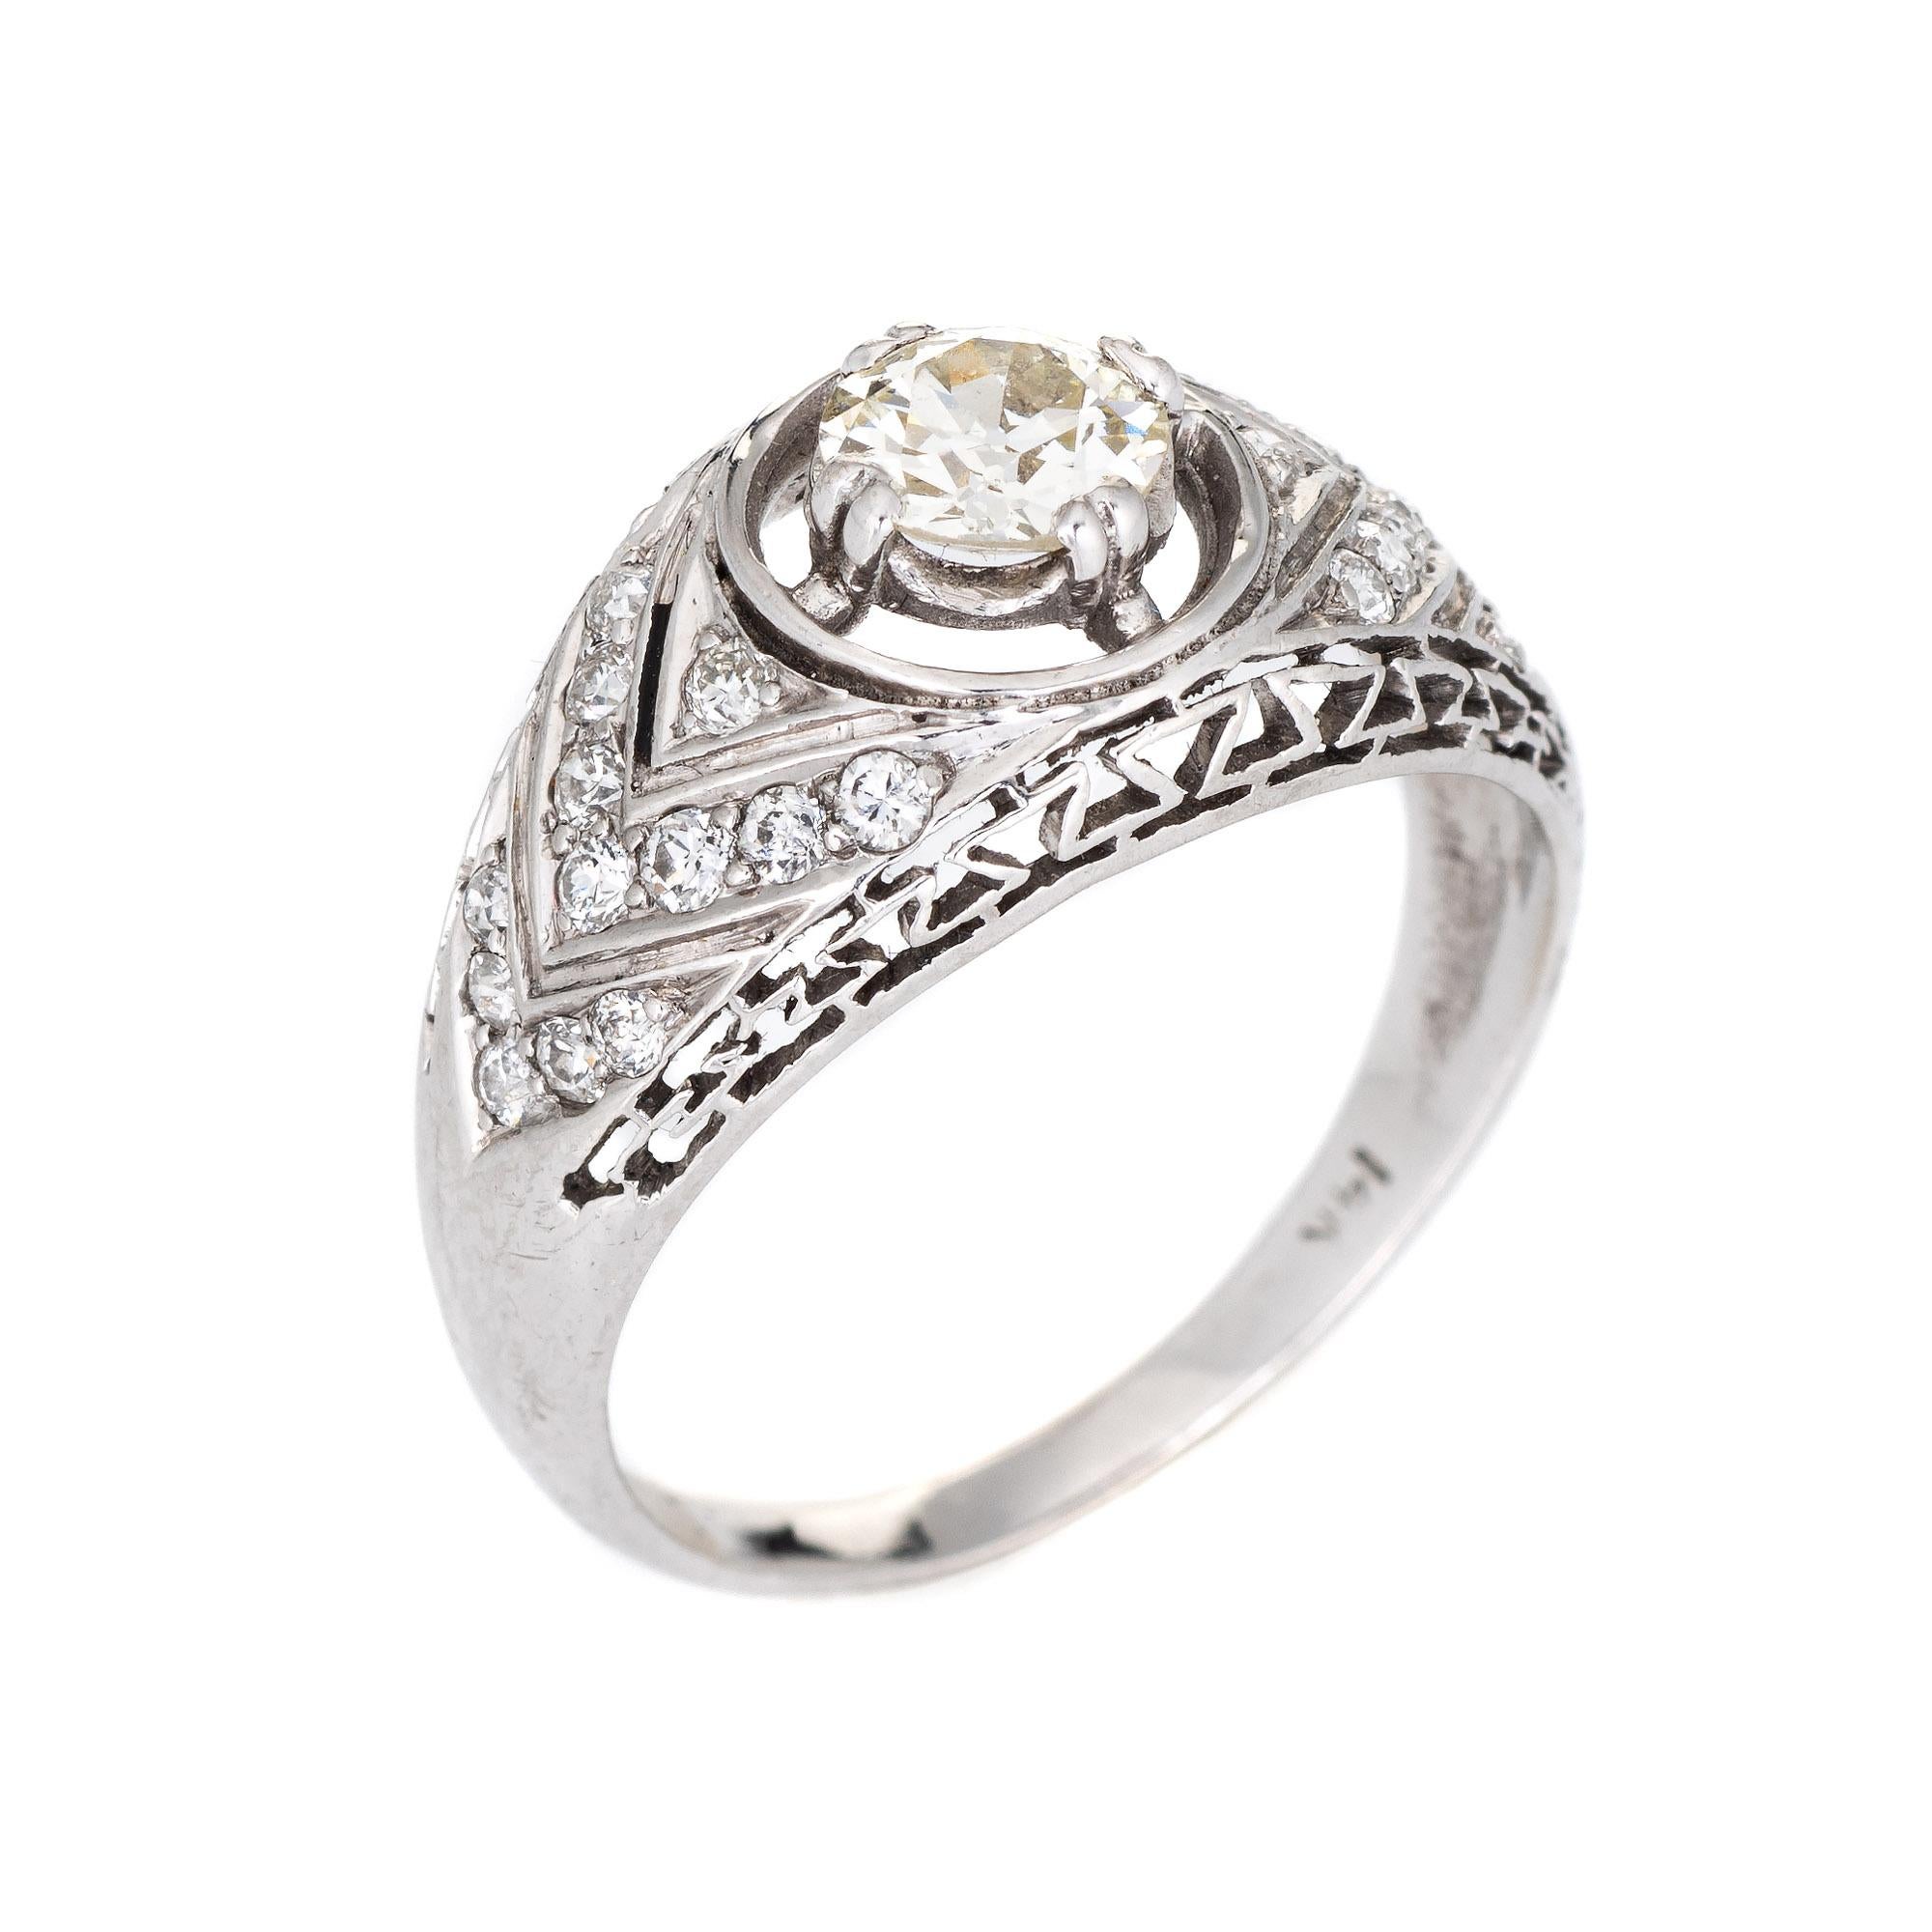 Finely detailed vintage Art Deco diamond ring (circa 1920s to 1930s) crafted in 14k white gold & platinum. 

Center set old European cut diamond is estimated at 0.55 carats, accented with an estimated 0.26 carats of diamonds. The total diamond